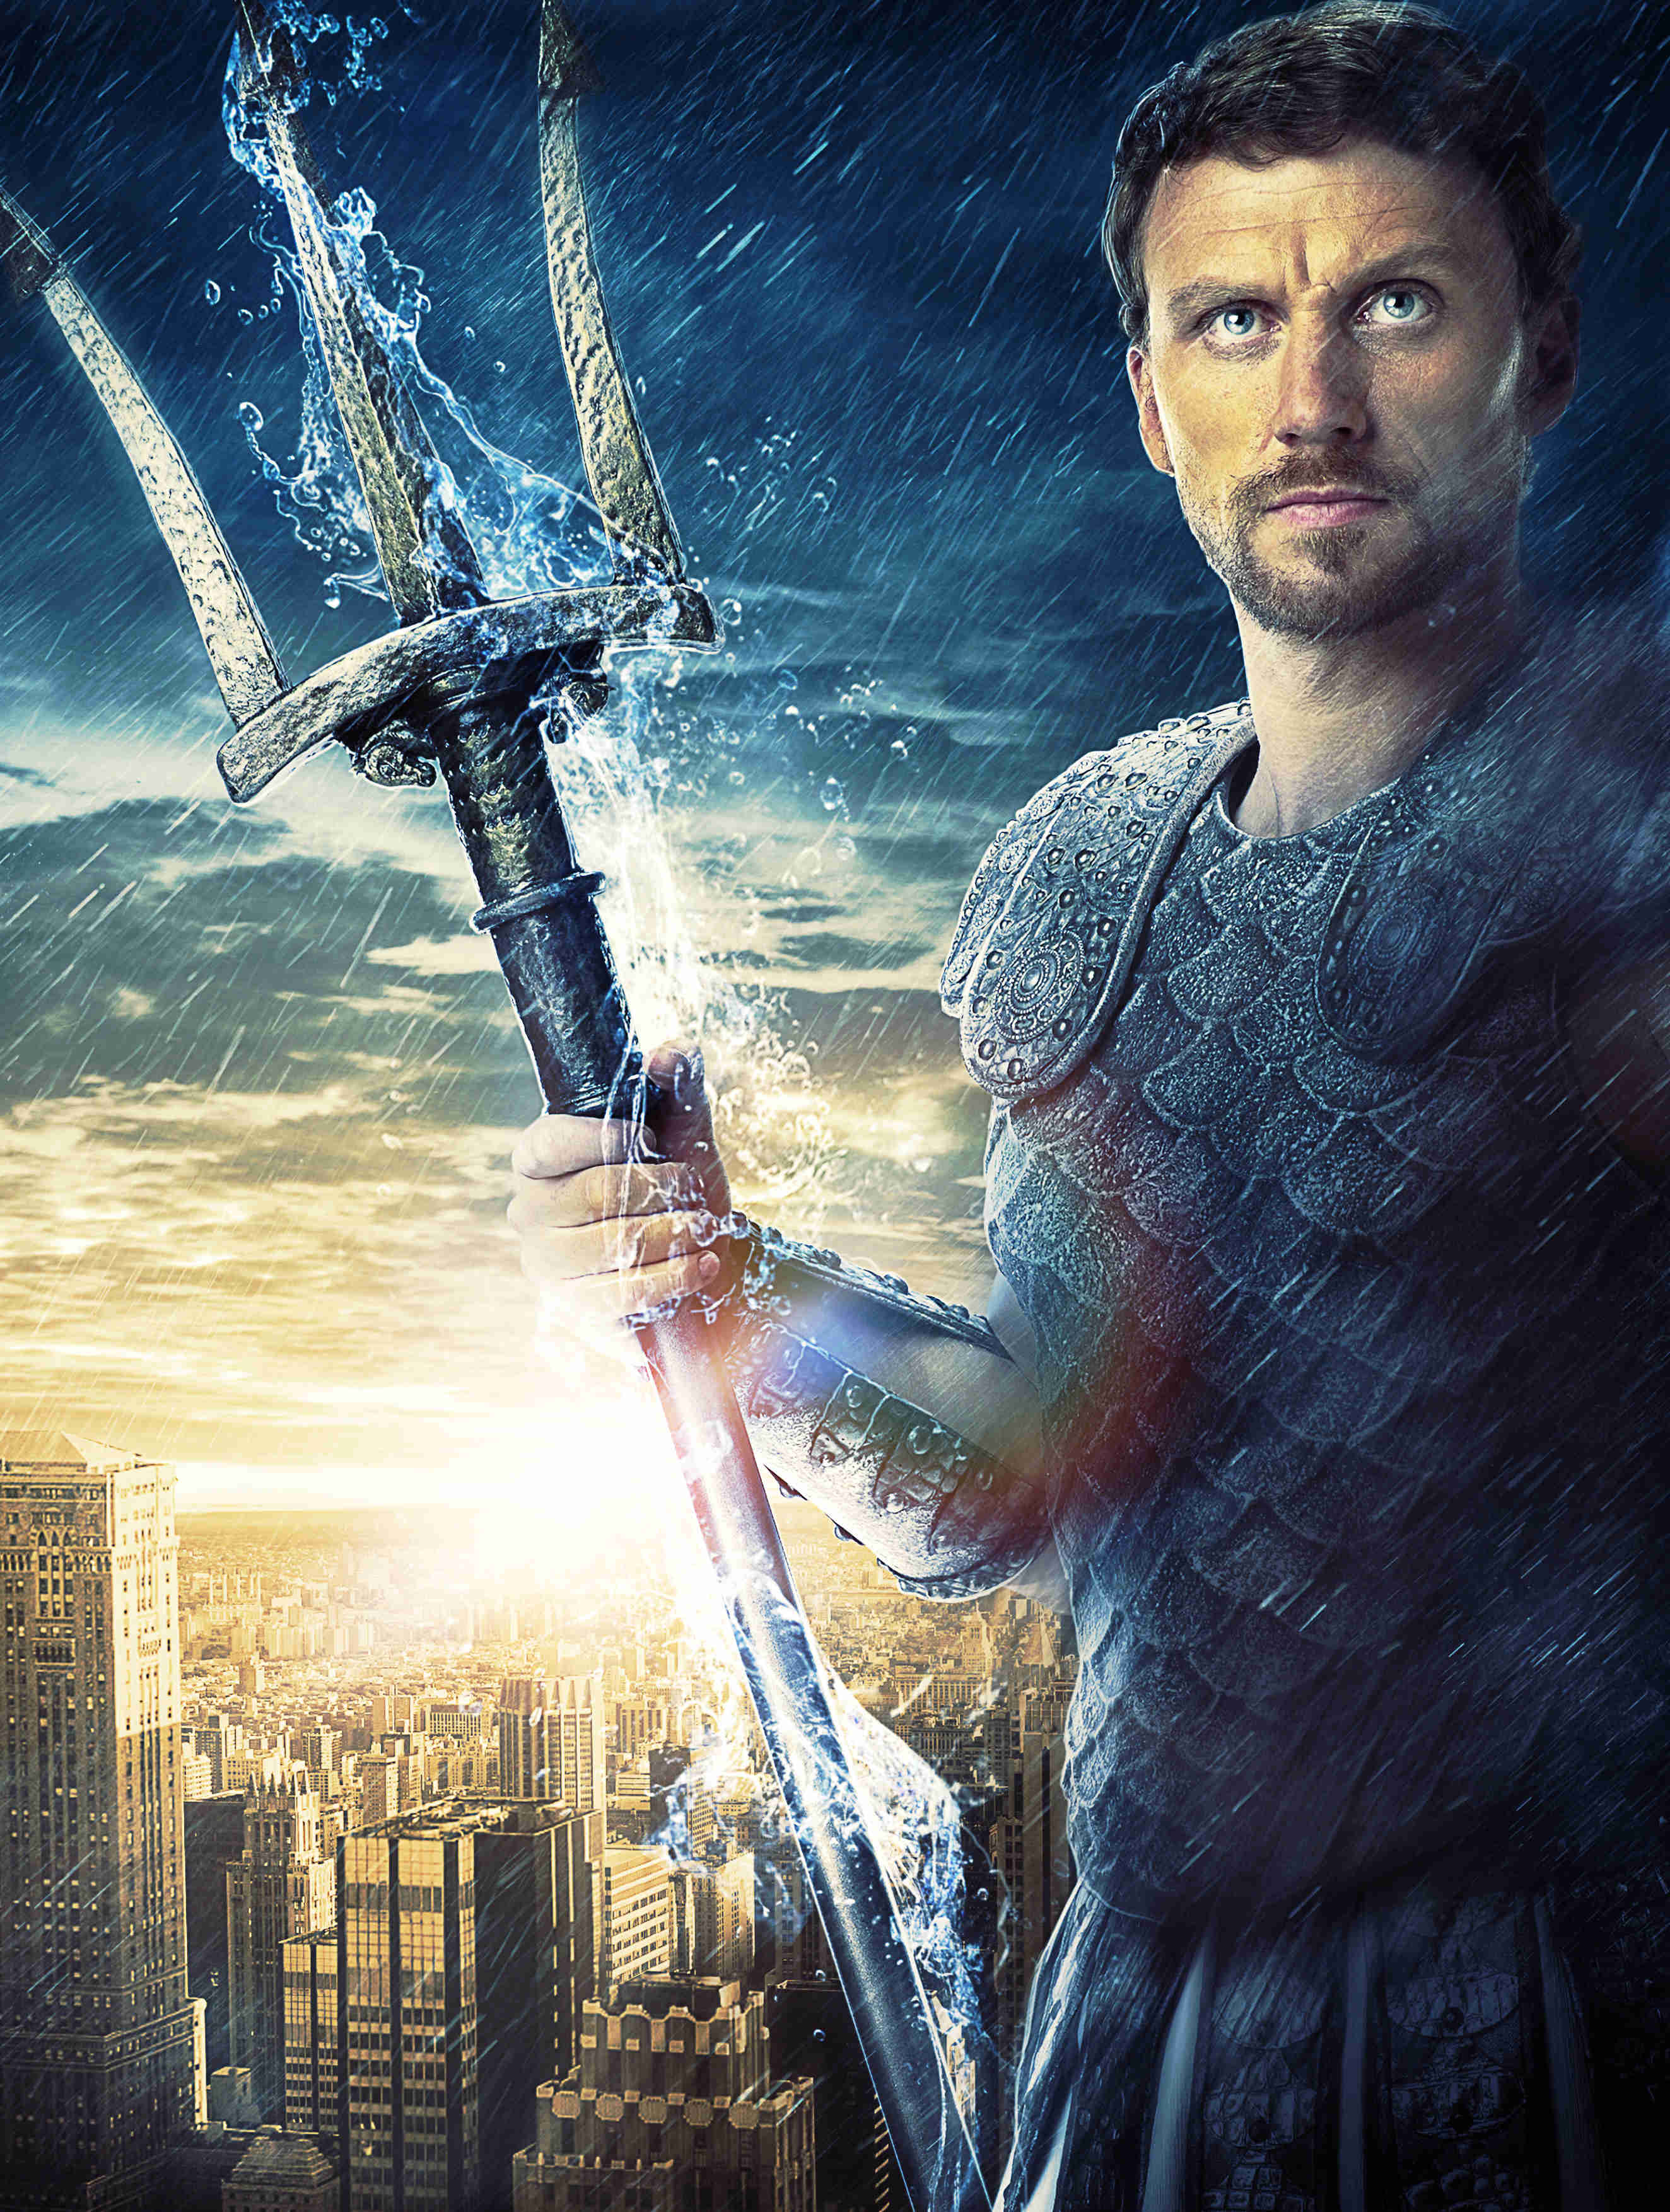 Poster of Percy Jackson & the Olympians: The Lightning Thief (2010)